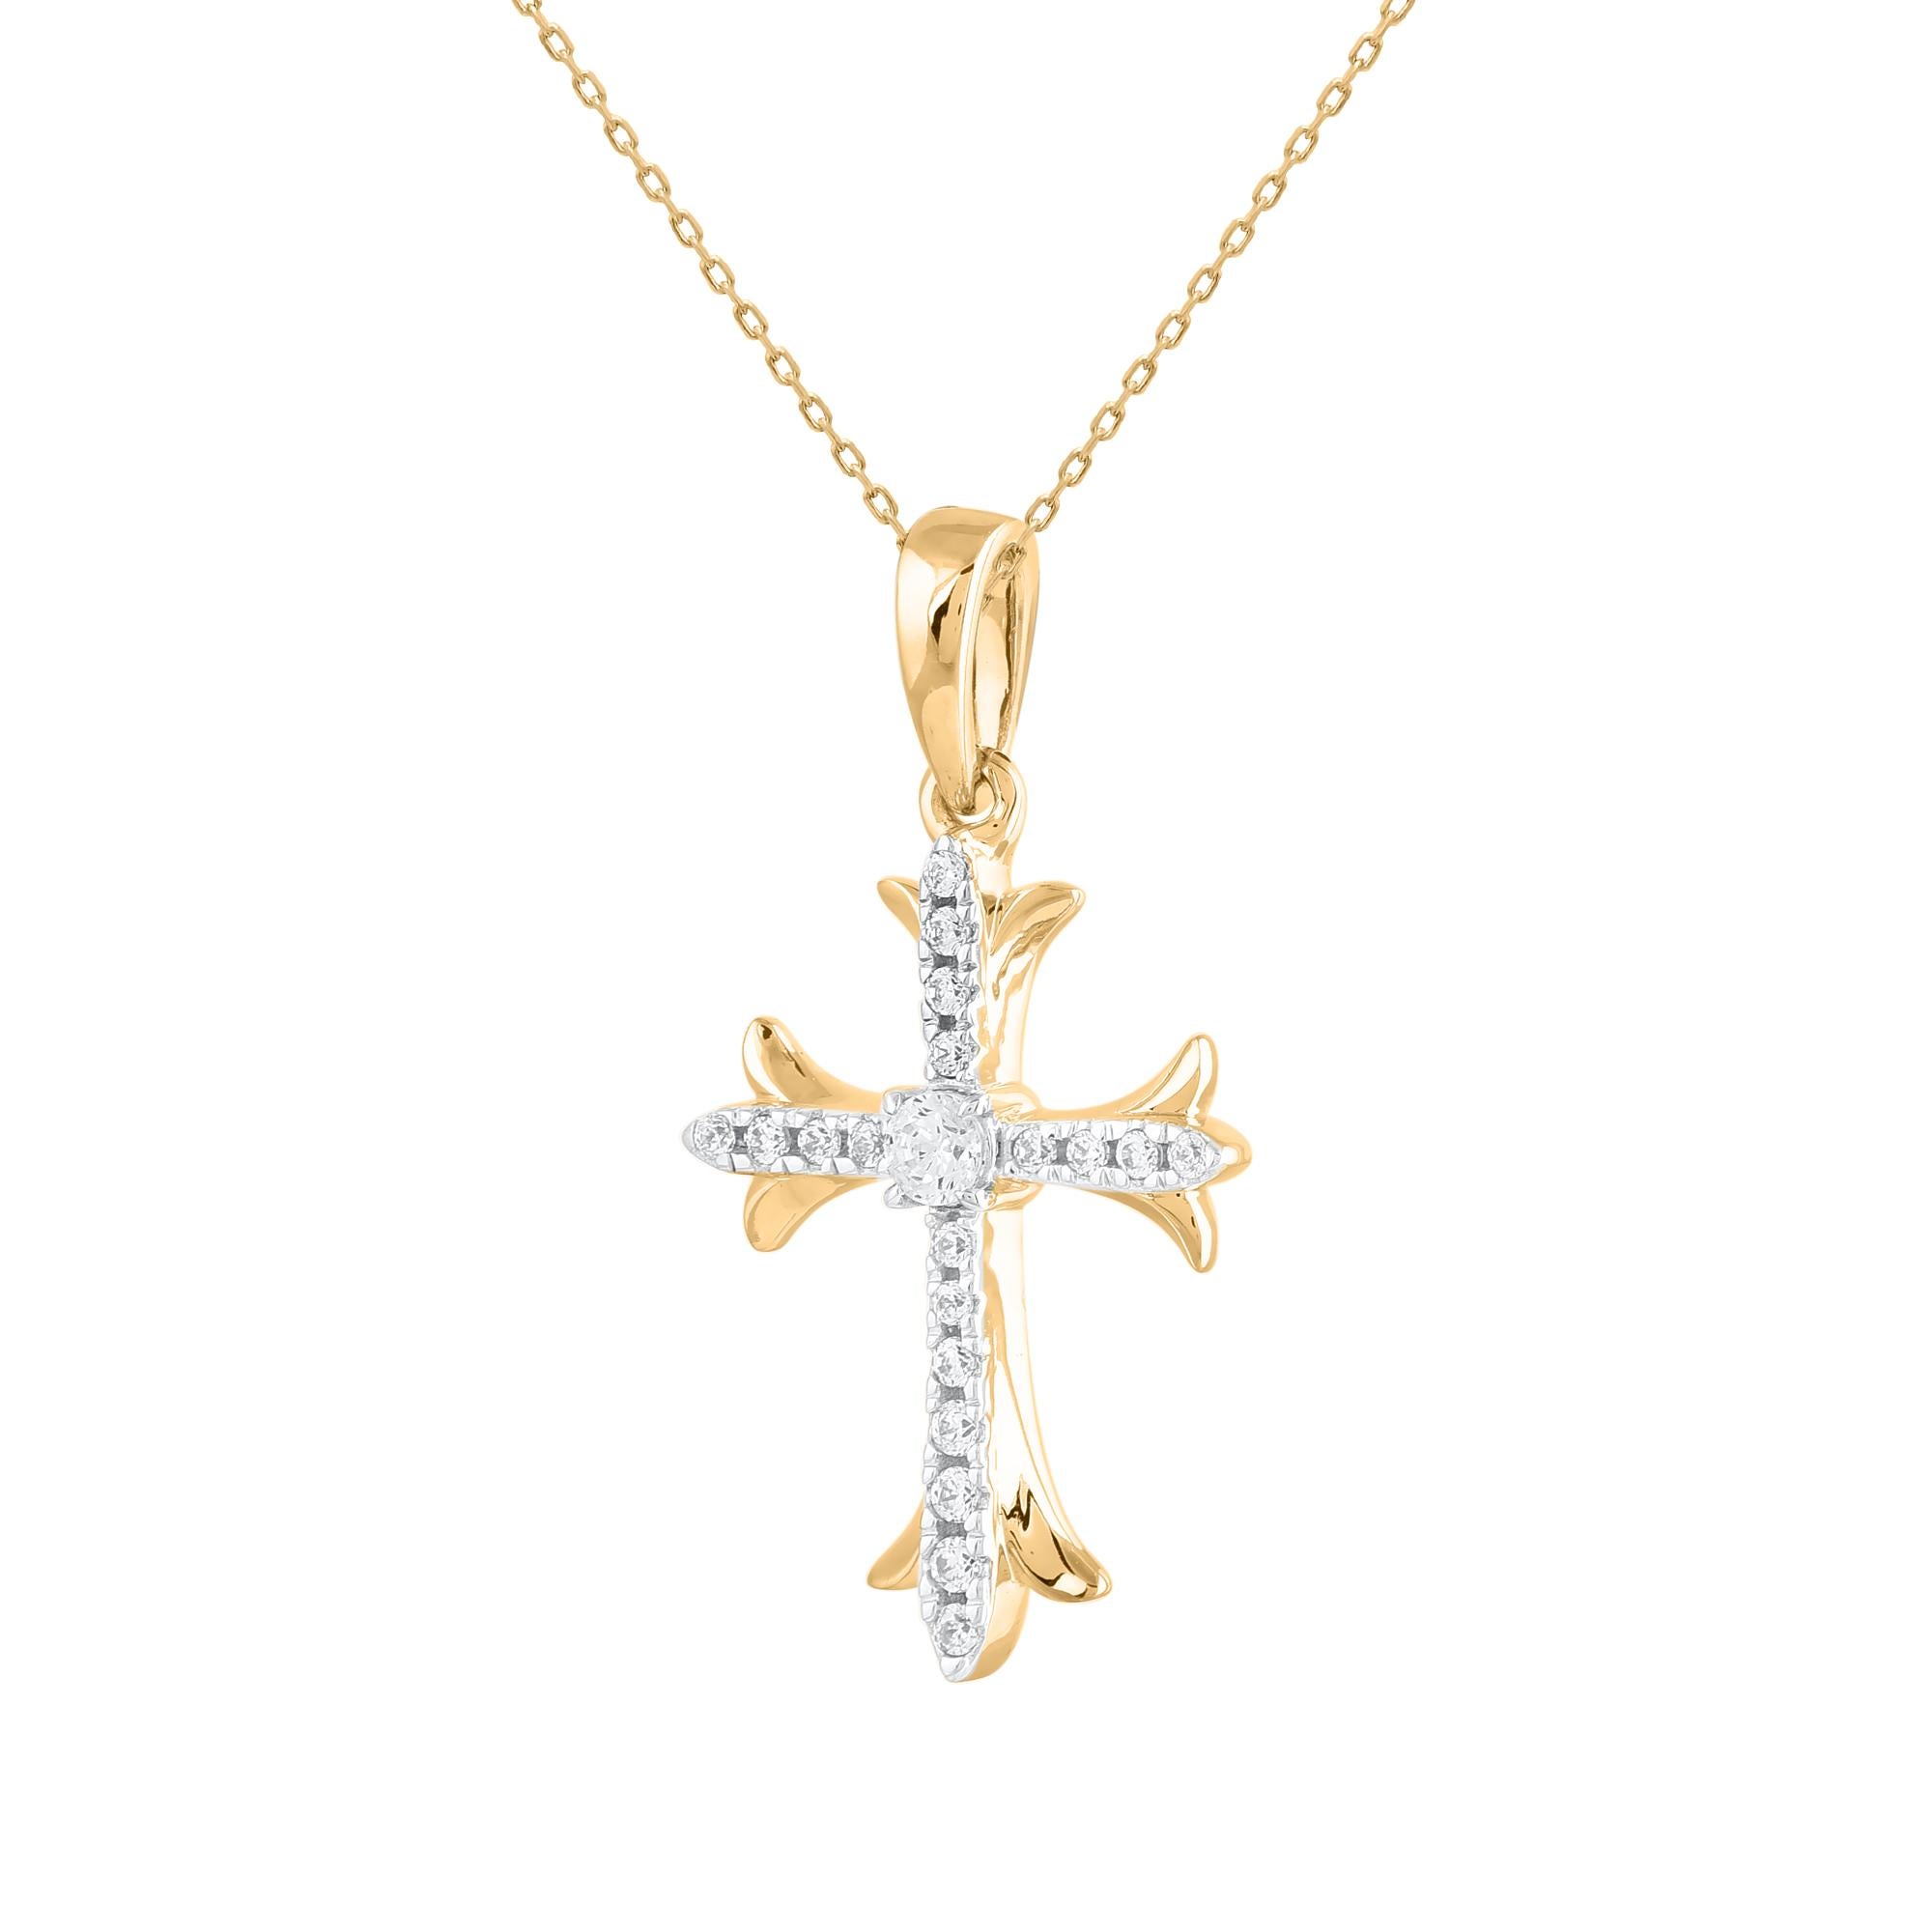 The traditional cross pendant has been given an update with the emphasis on style. Beautifully crafted by our inhouse experts in 18 karat two tone gold and embellished with 20 round diamond in prong setting. The total diamond weight is 0.10 carat